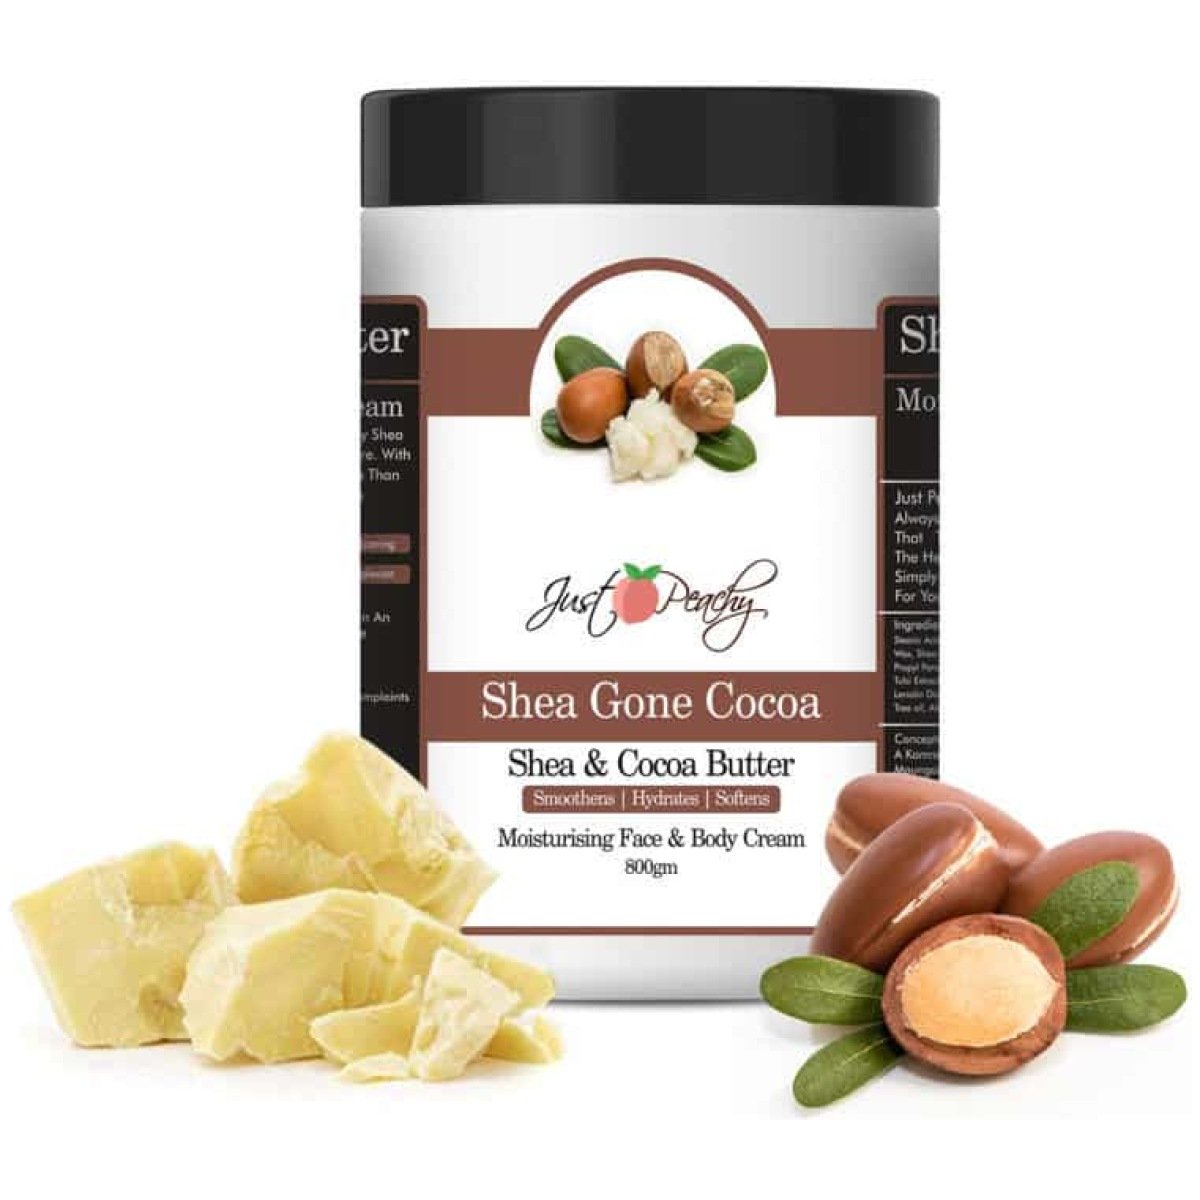 Just Peachy Shea Gone Cocoa Face And Body Cream Enriched With Tea Tree And Sunflower Oil 800Gm